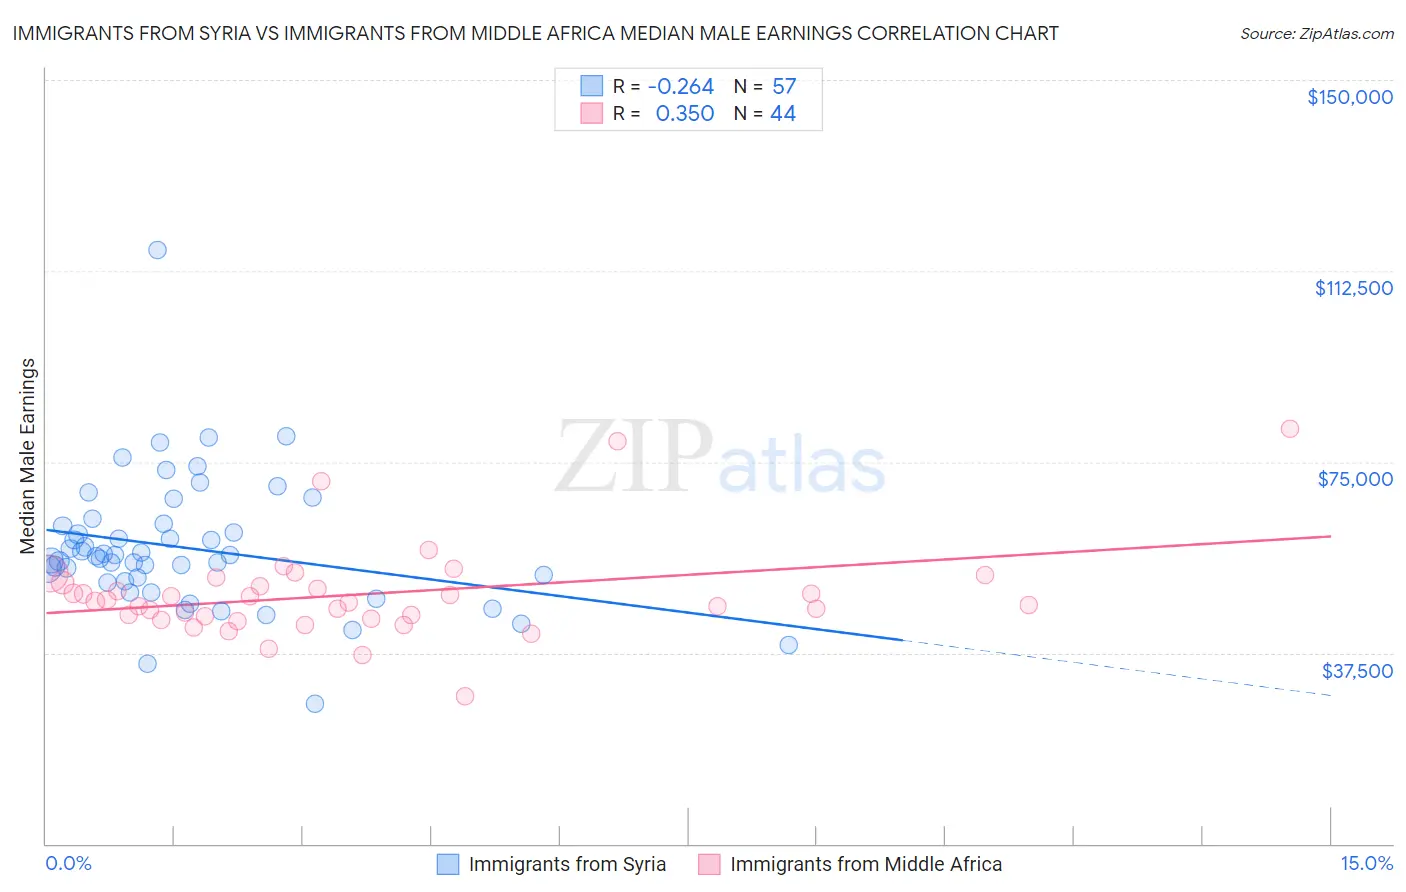 Immigrants from Syria vs Immigrants from Middle Africa Median Male Earnings